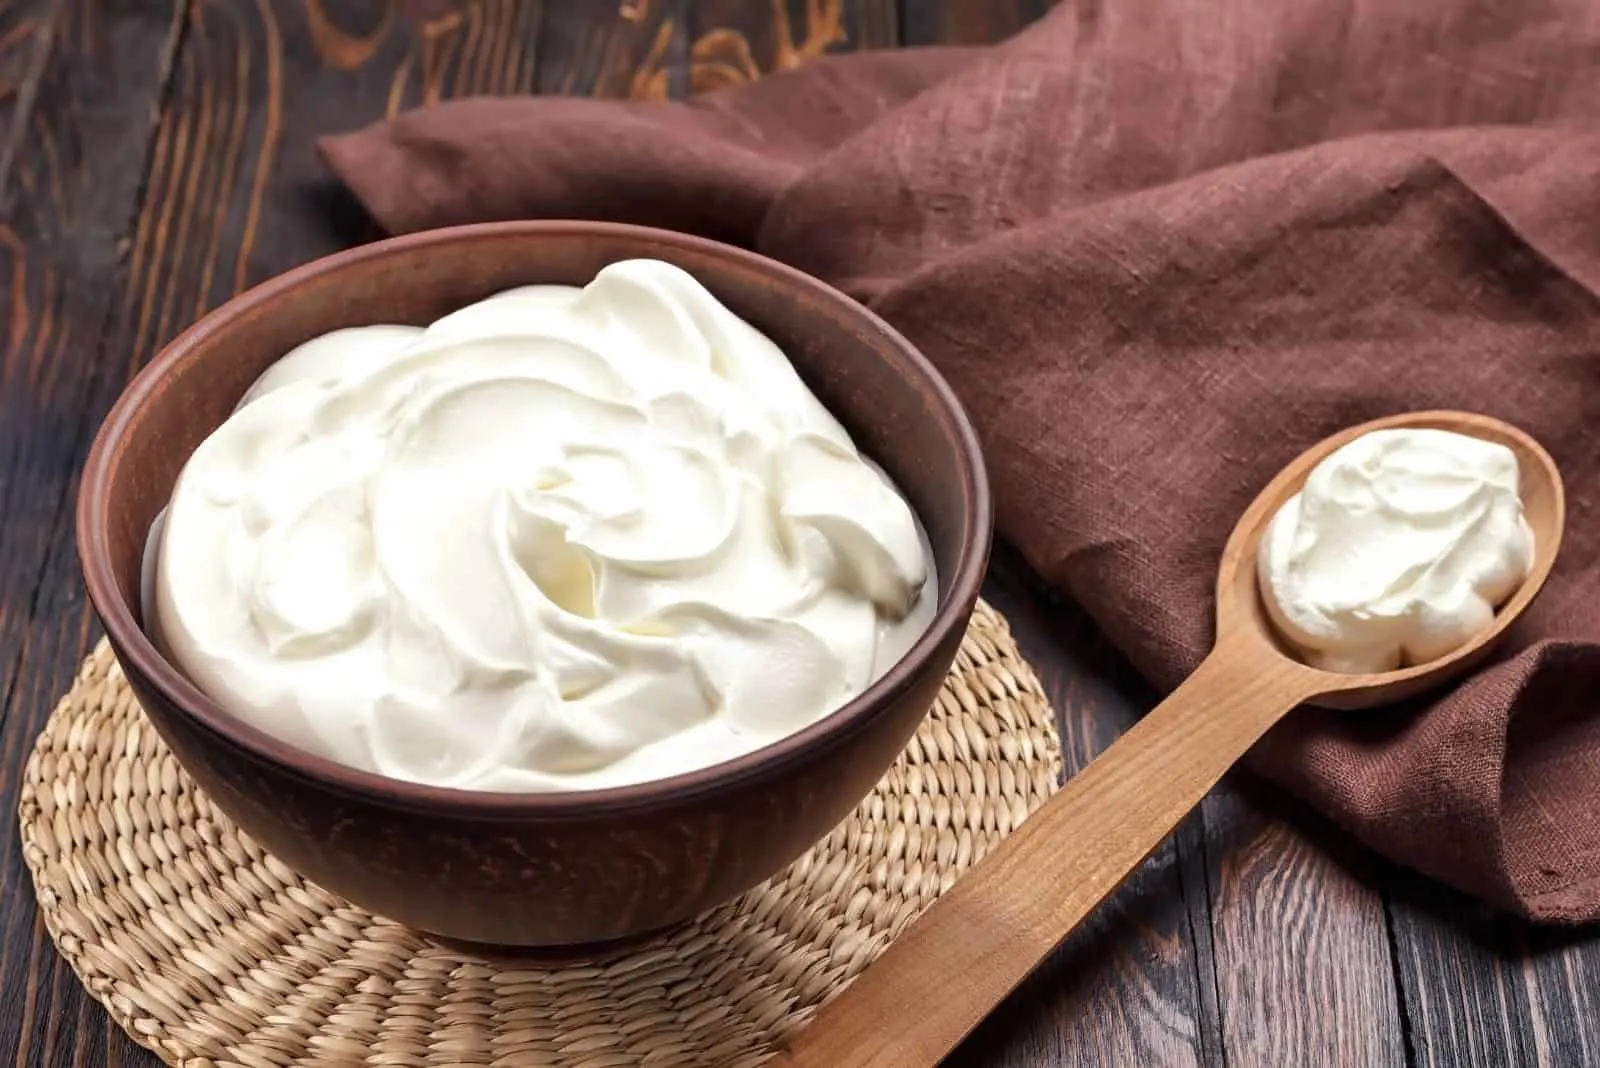 white sour cream in a wooden bowl and spoon